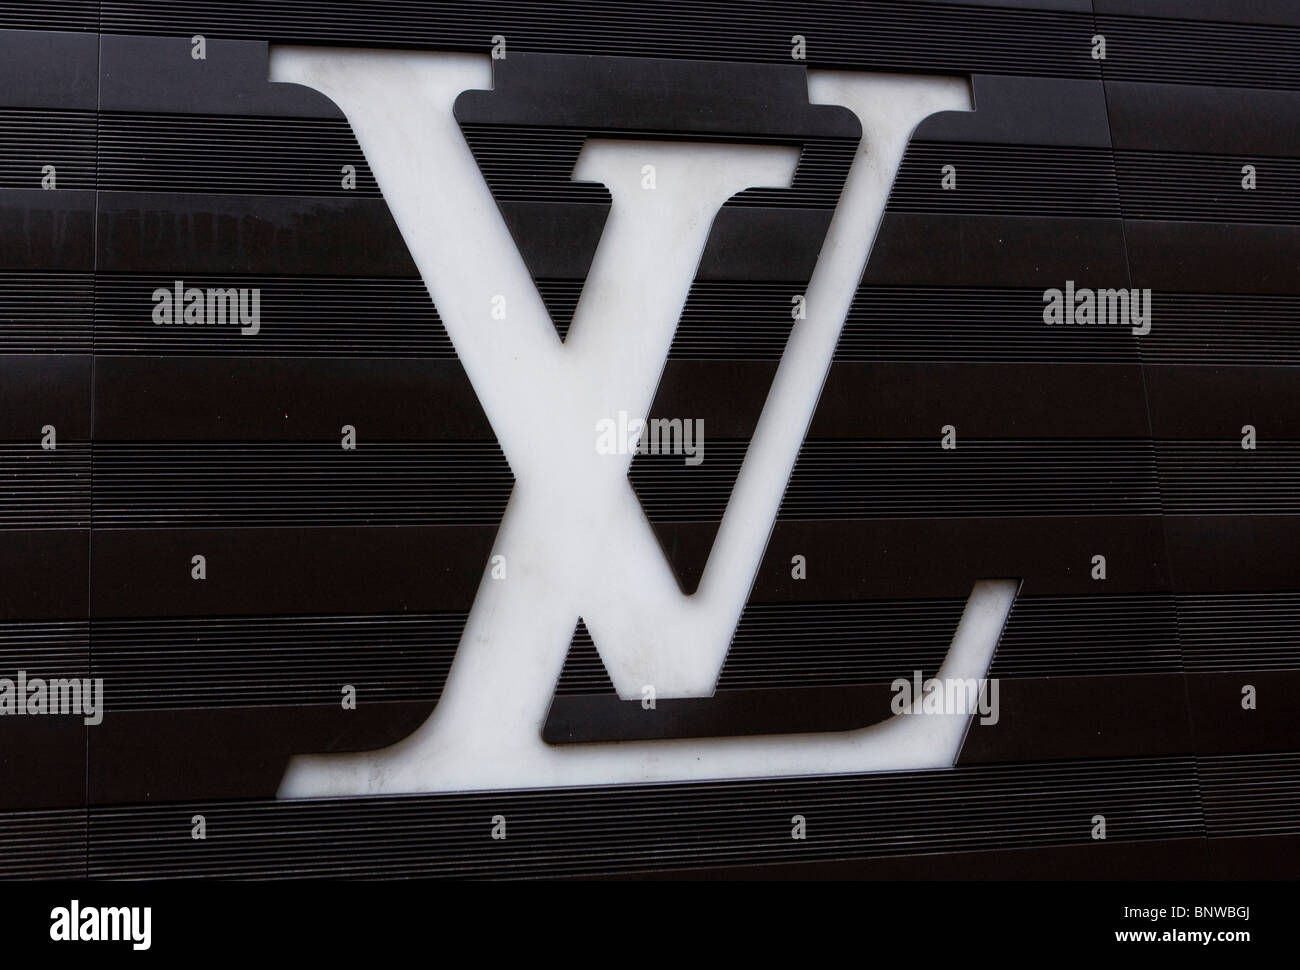 Shtreetwear on X: Sketches of Various Louis Vuitton Logos by